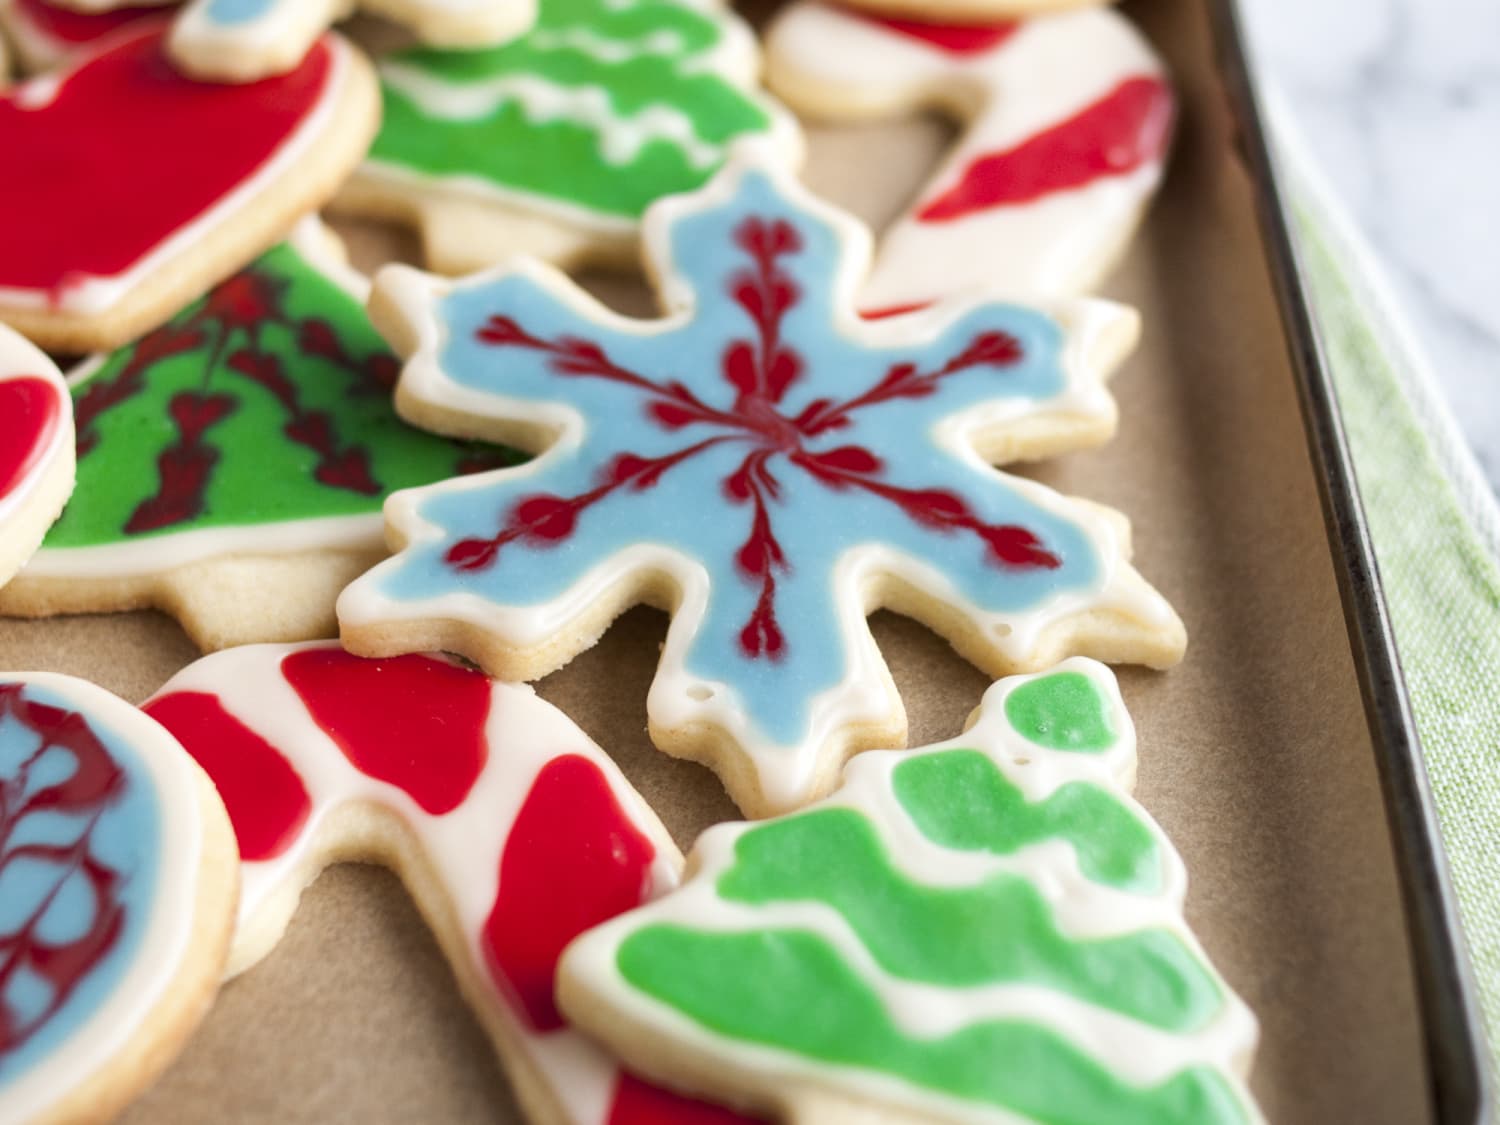 How To Decorate Cookies With 2 Ingredient Easy Icing Kitchn